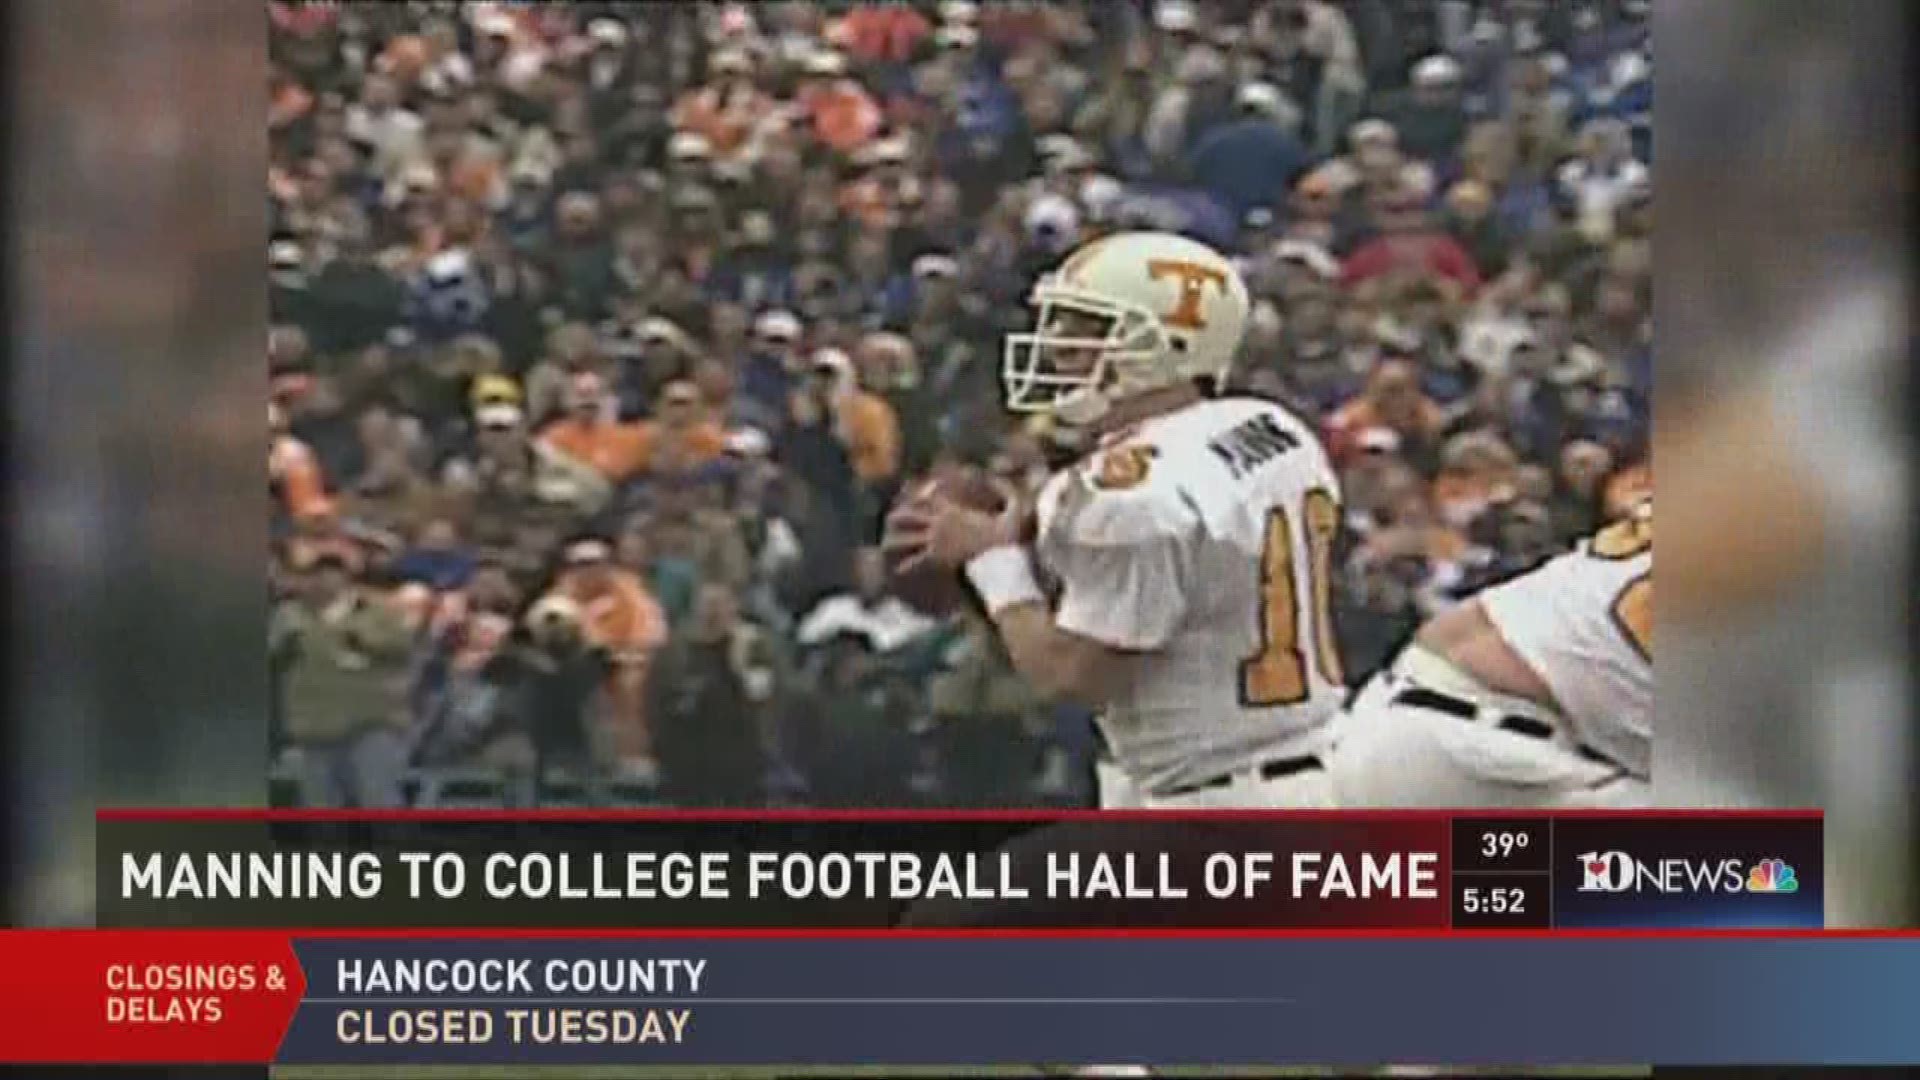 The National Football Foundation announced Monday former Tennessee Volunteers quarterback Peyton Manning was a first-ballot selection to the College Football Hall of Fame.Manning is set to become the 20th University of Tennessee